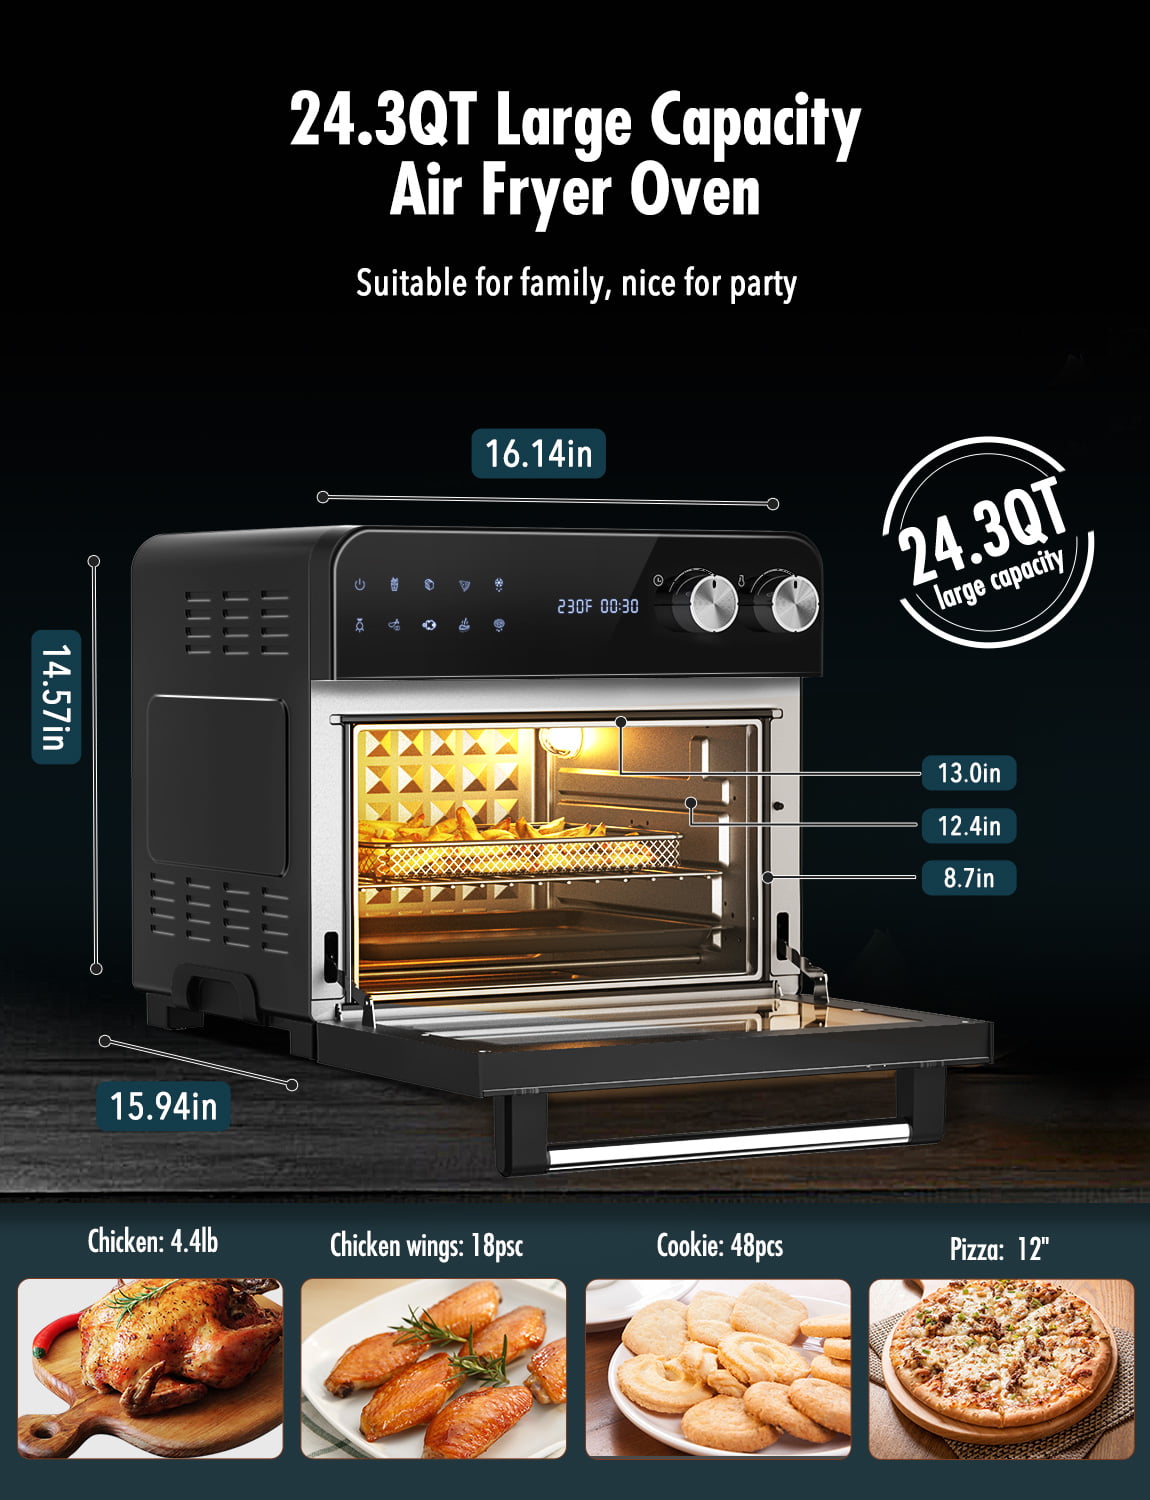 Moosoo New Air Fryer Oven 24.3QT Capacity Toaster Oven Stainless